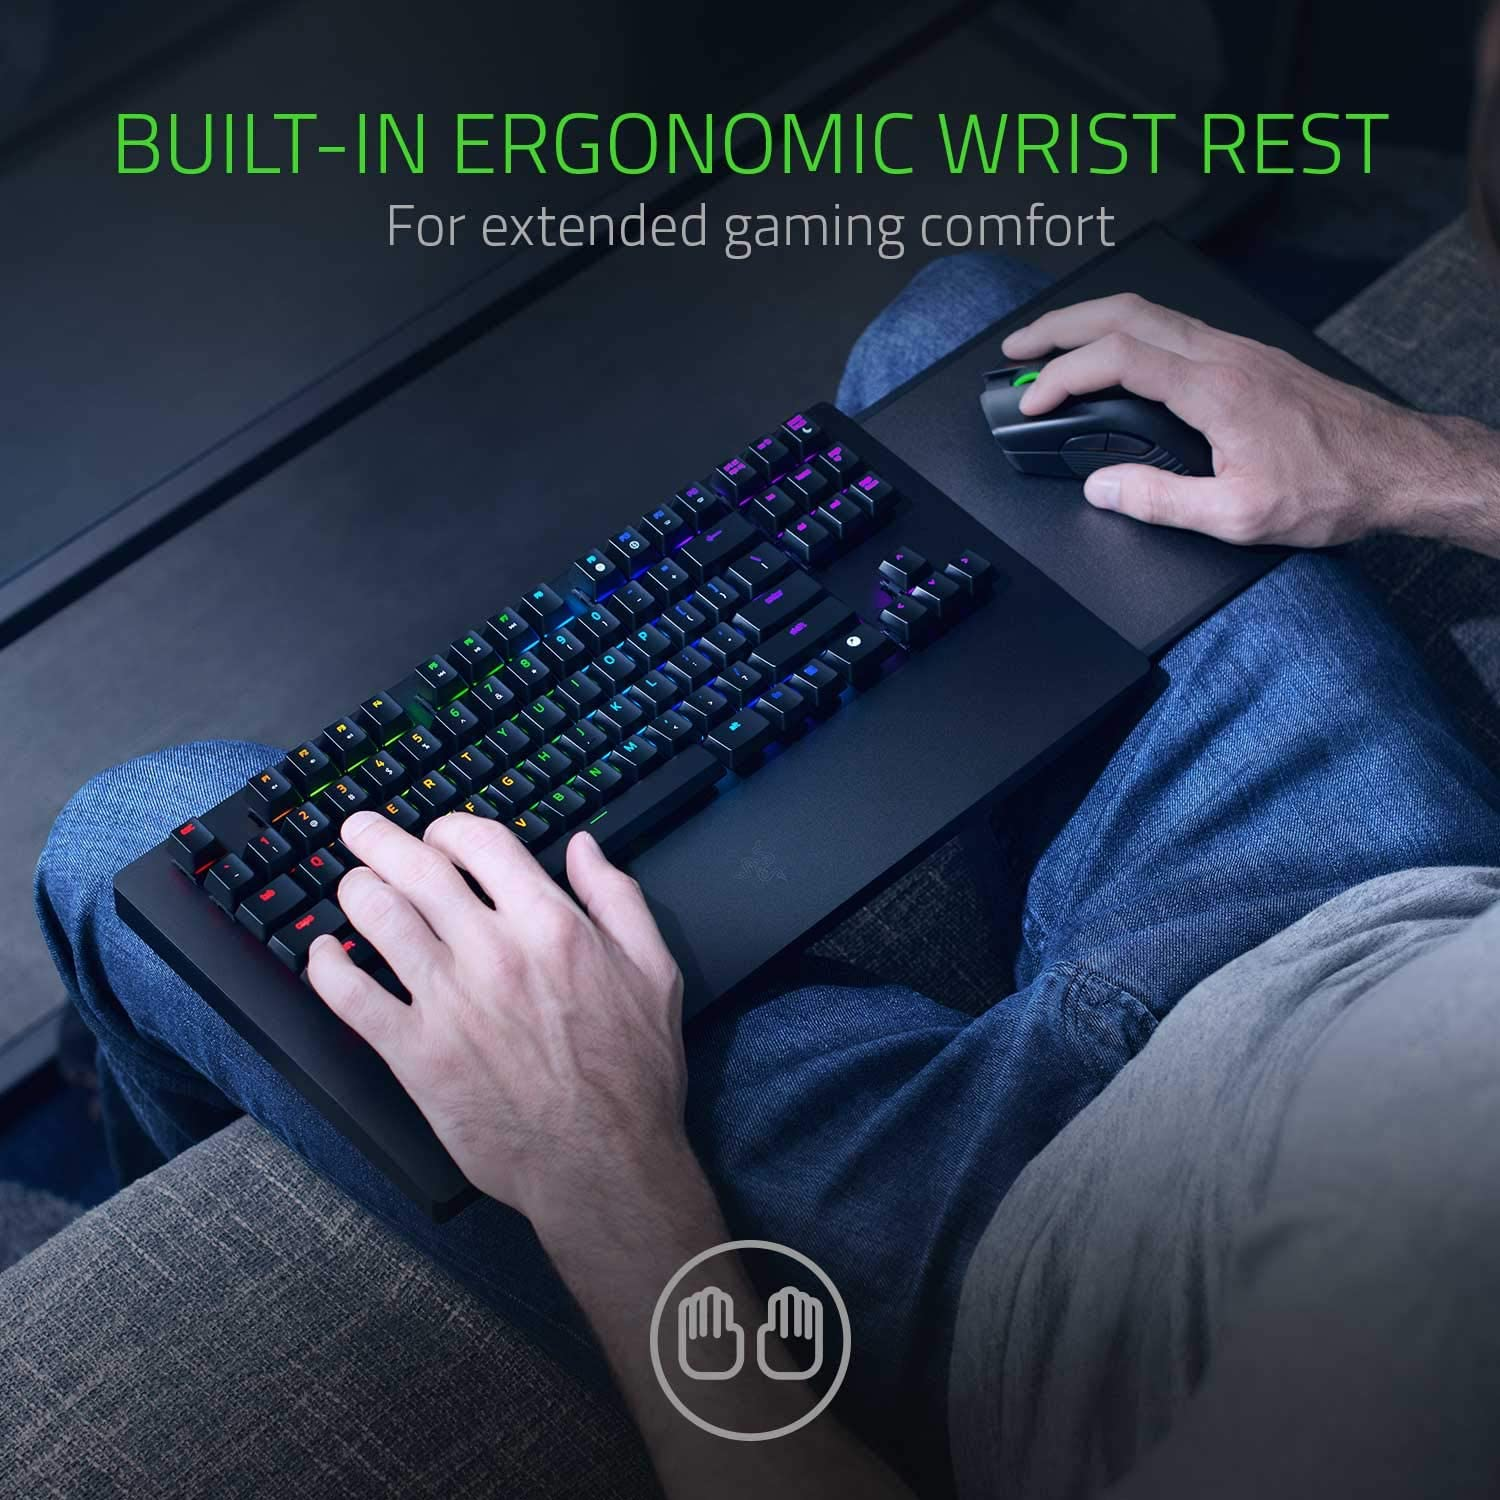 There are various benefits to using a lap keyboard like this while gaming from your sofa.